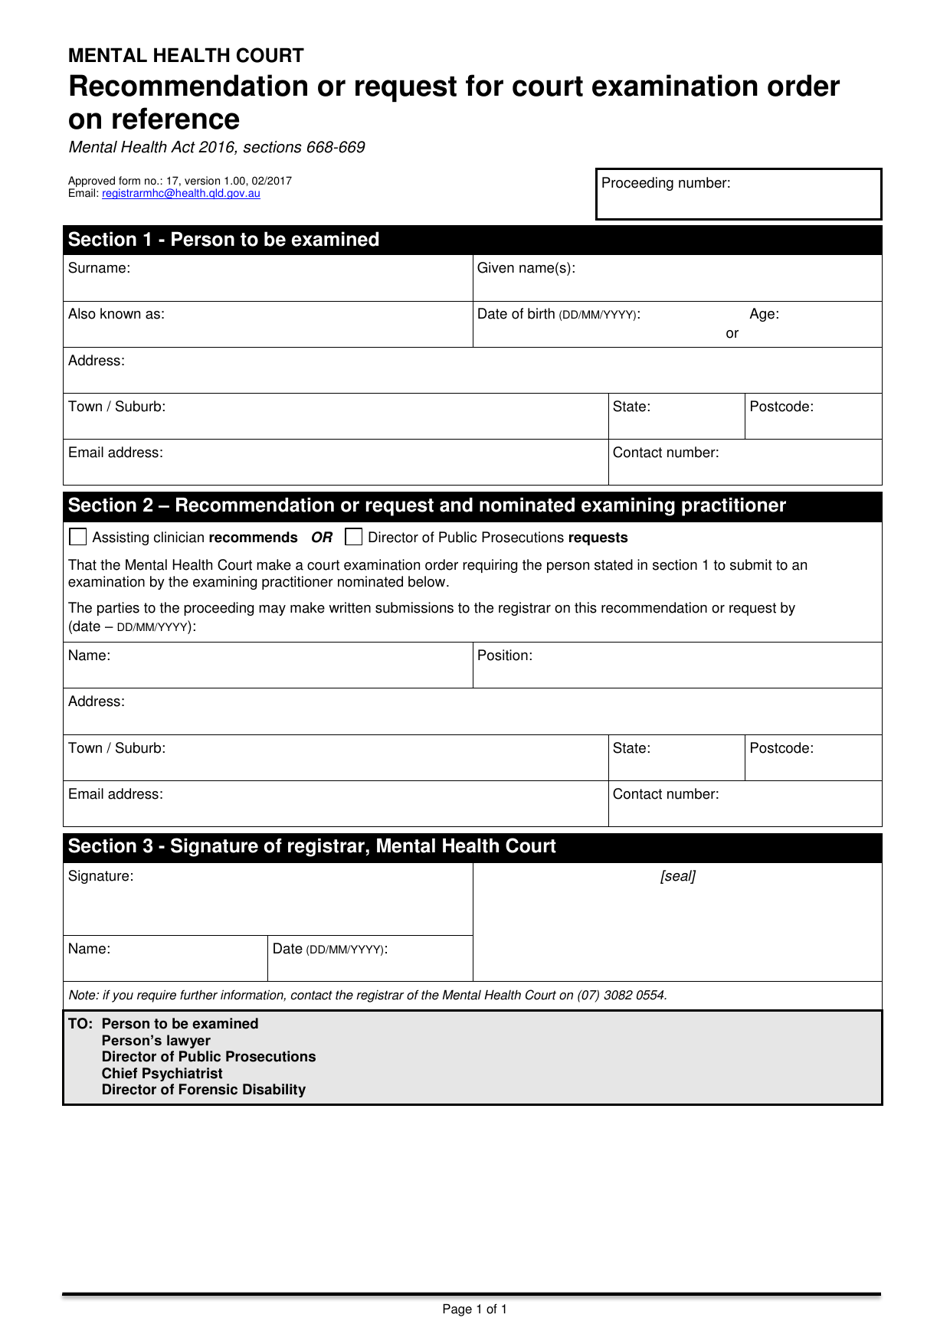 Form 17 Recommendation or Request for Court Examination Order on Reference - Queensland, Australia, Page 1